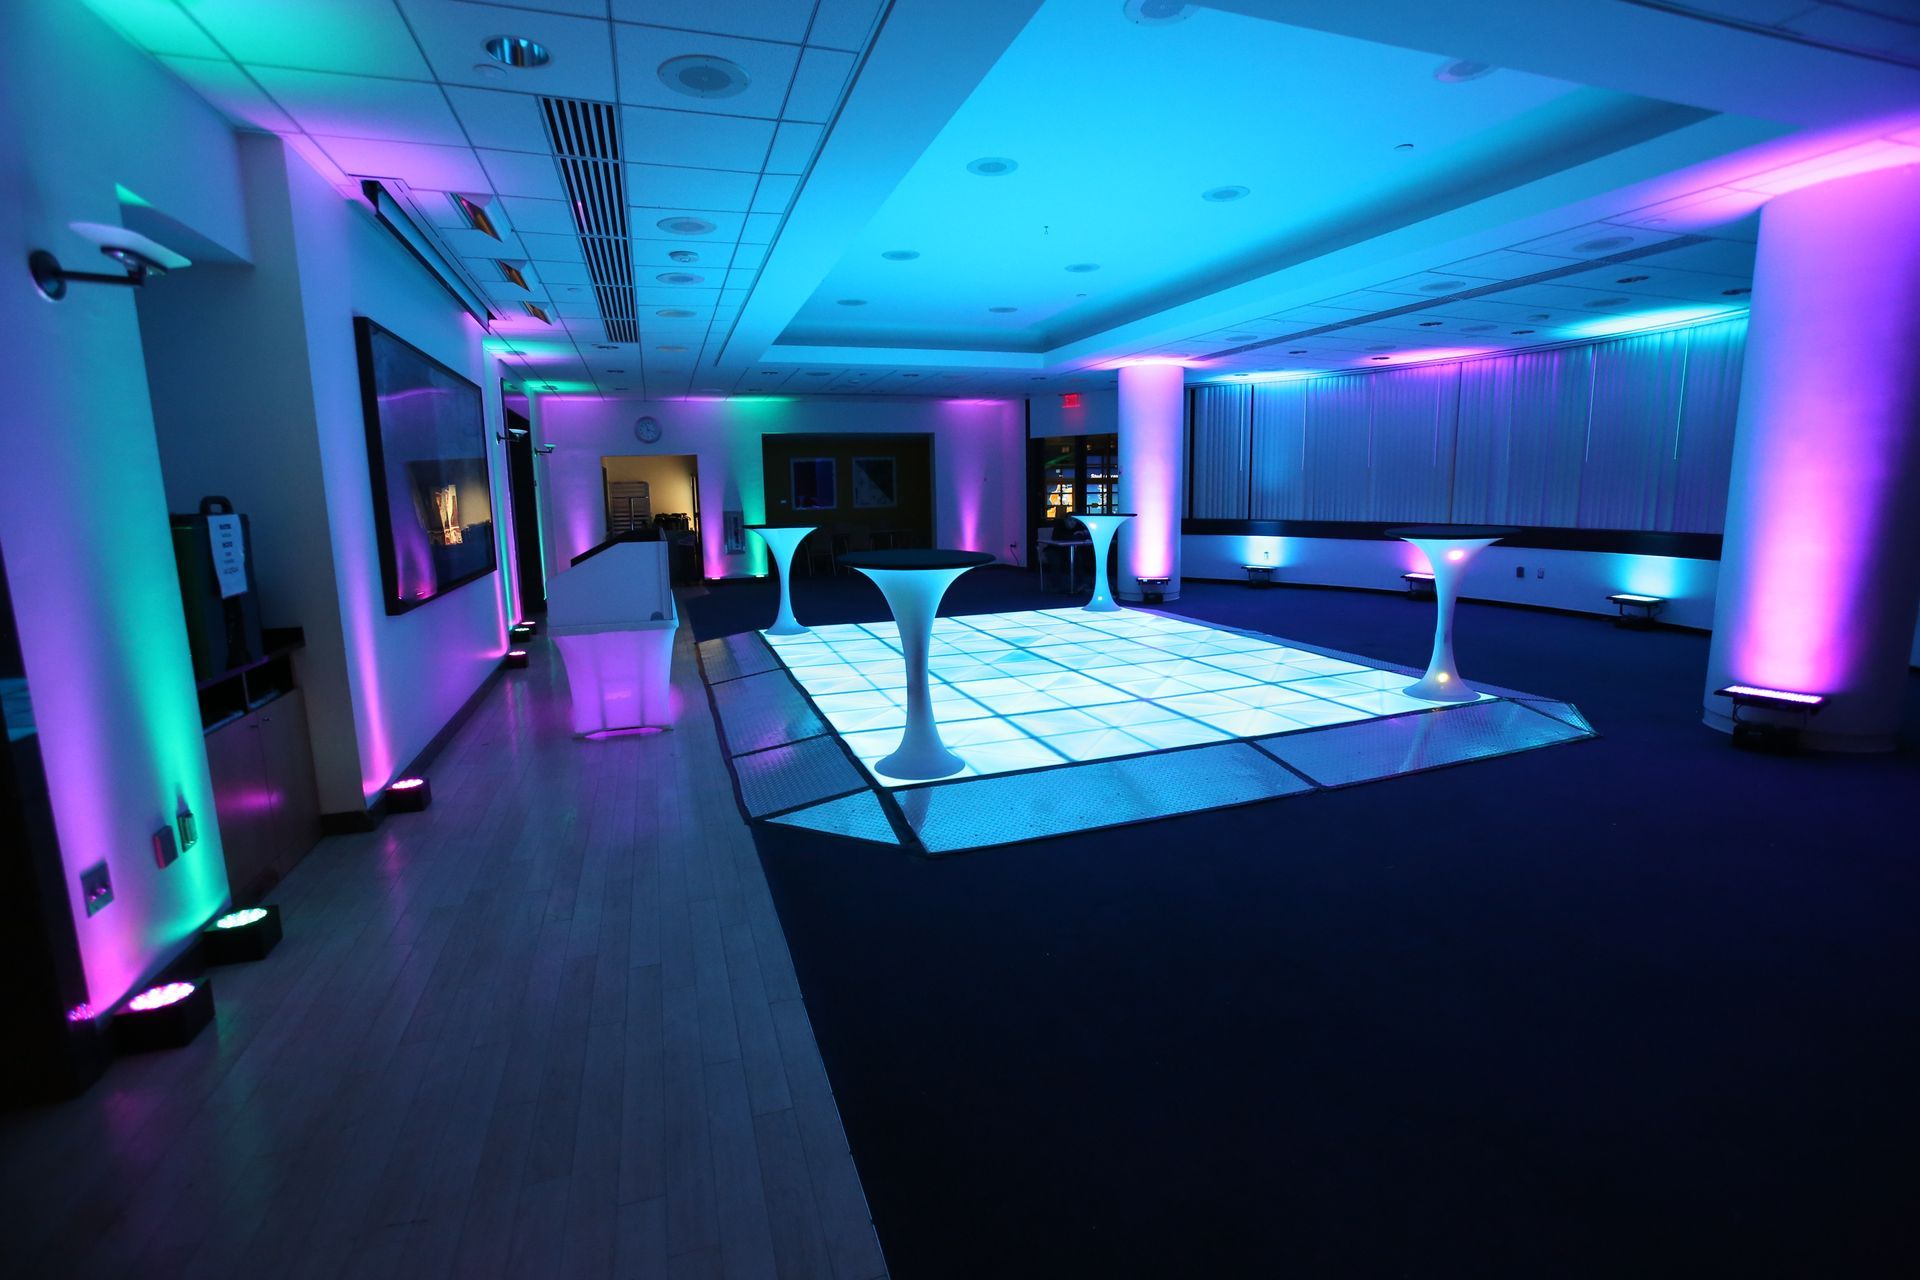 There is a led lit dance floor in the middle of the room with perimeter up-lighting